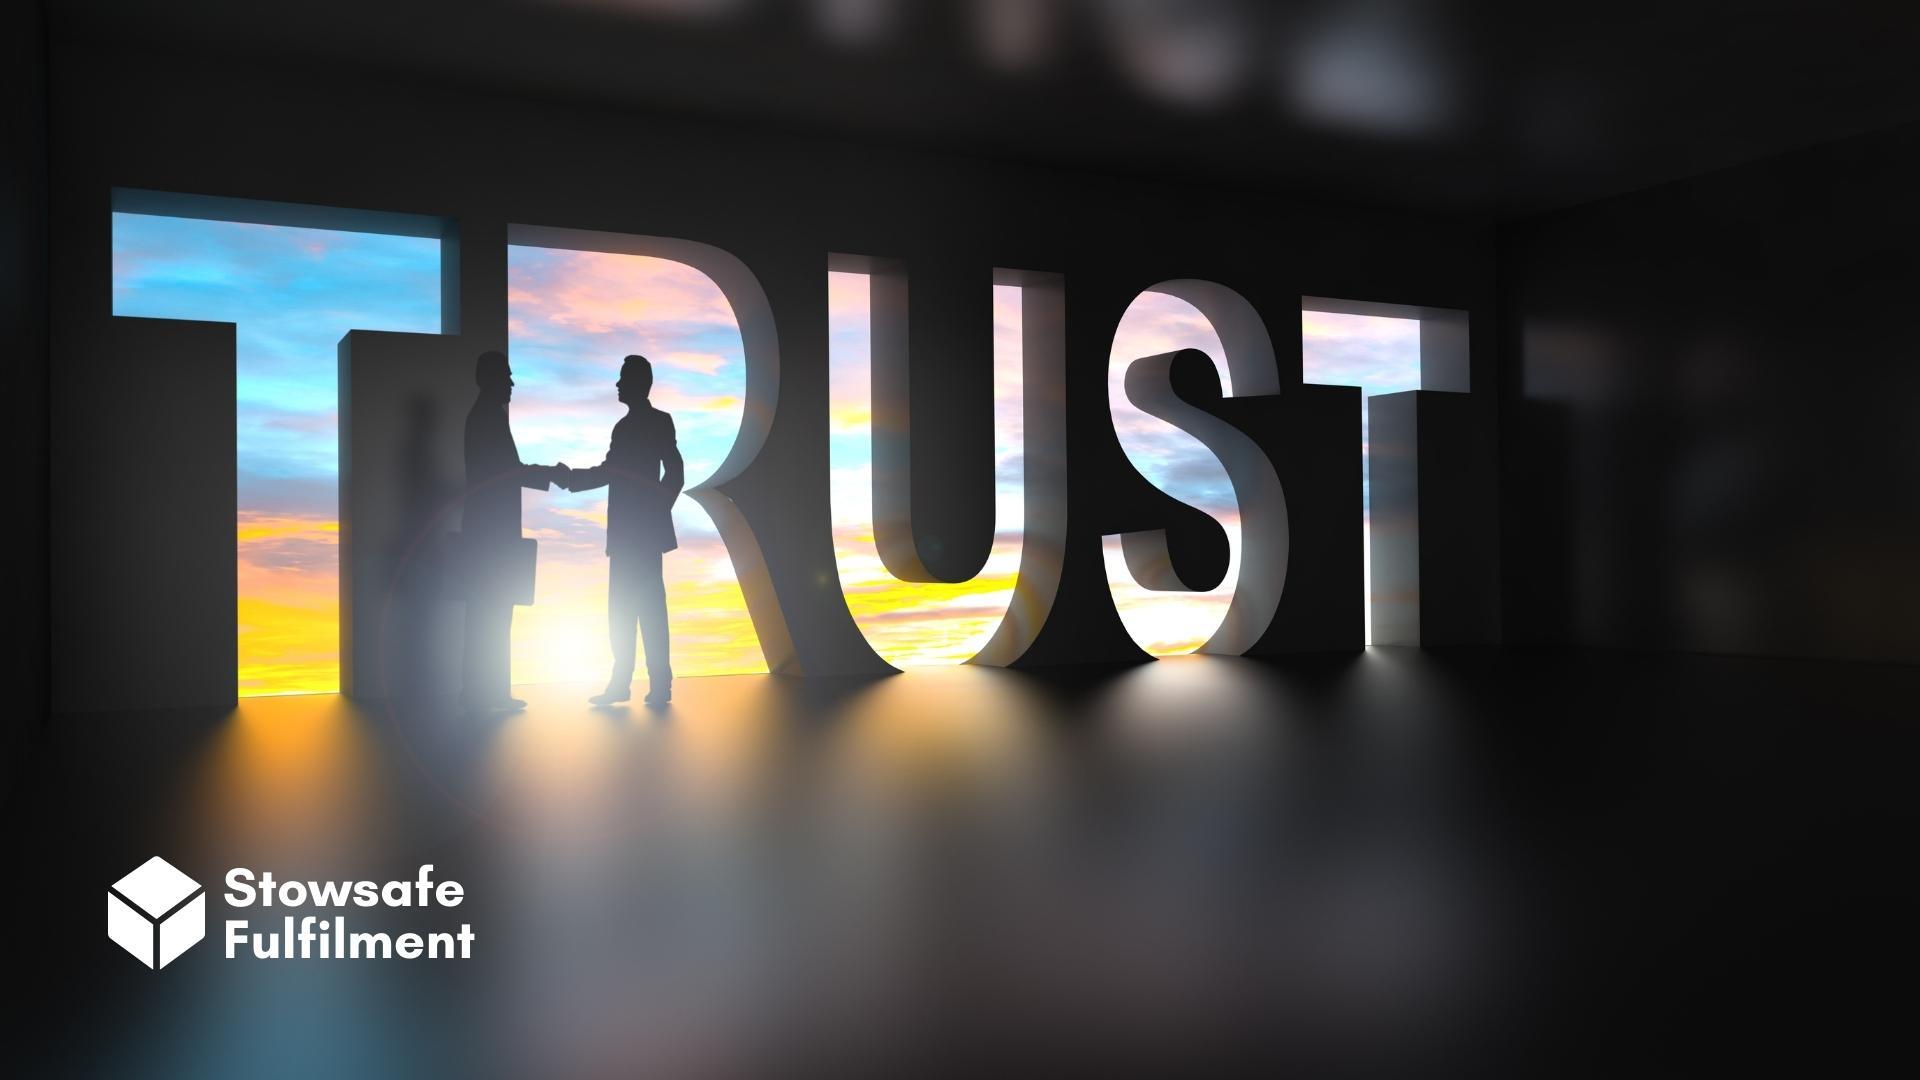 Customers want to trust eCommerce brands – and you as a brand want them to trust you too. In this article, we look at ways to gain customer trust.